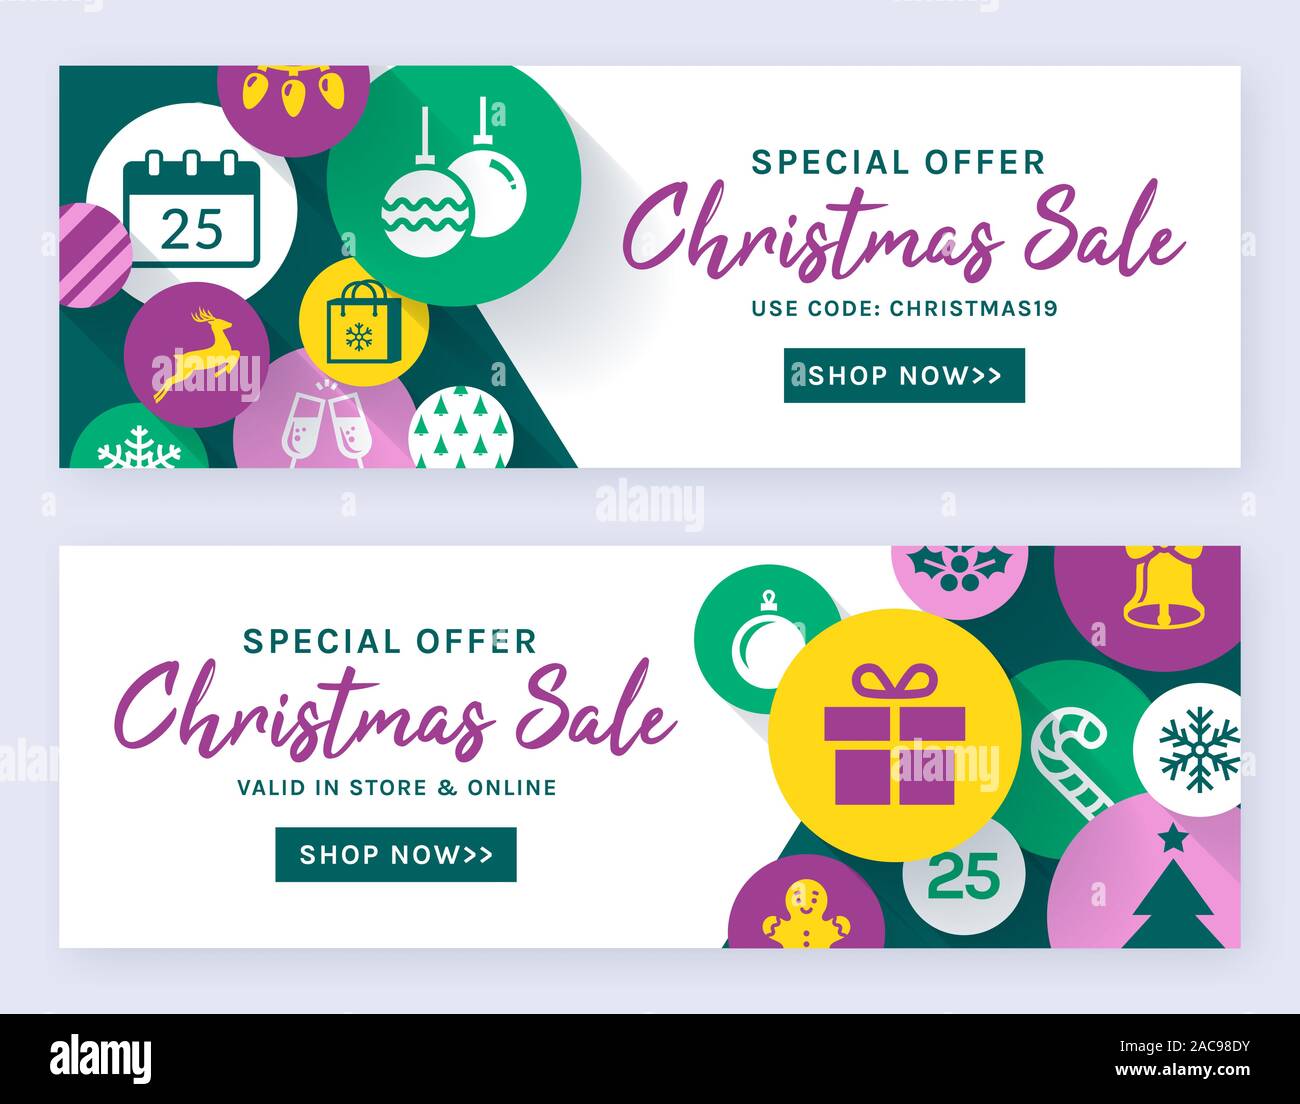 Christmas sale banners. Vector web templates. Horizontal labels set for holidays discounts and online shopping offers. Stock Vector